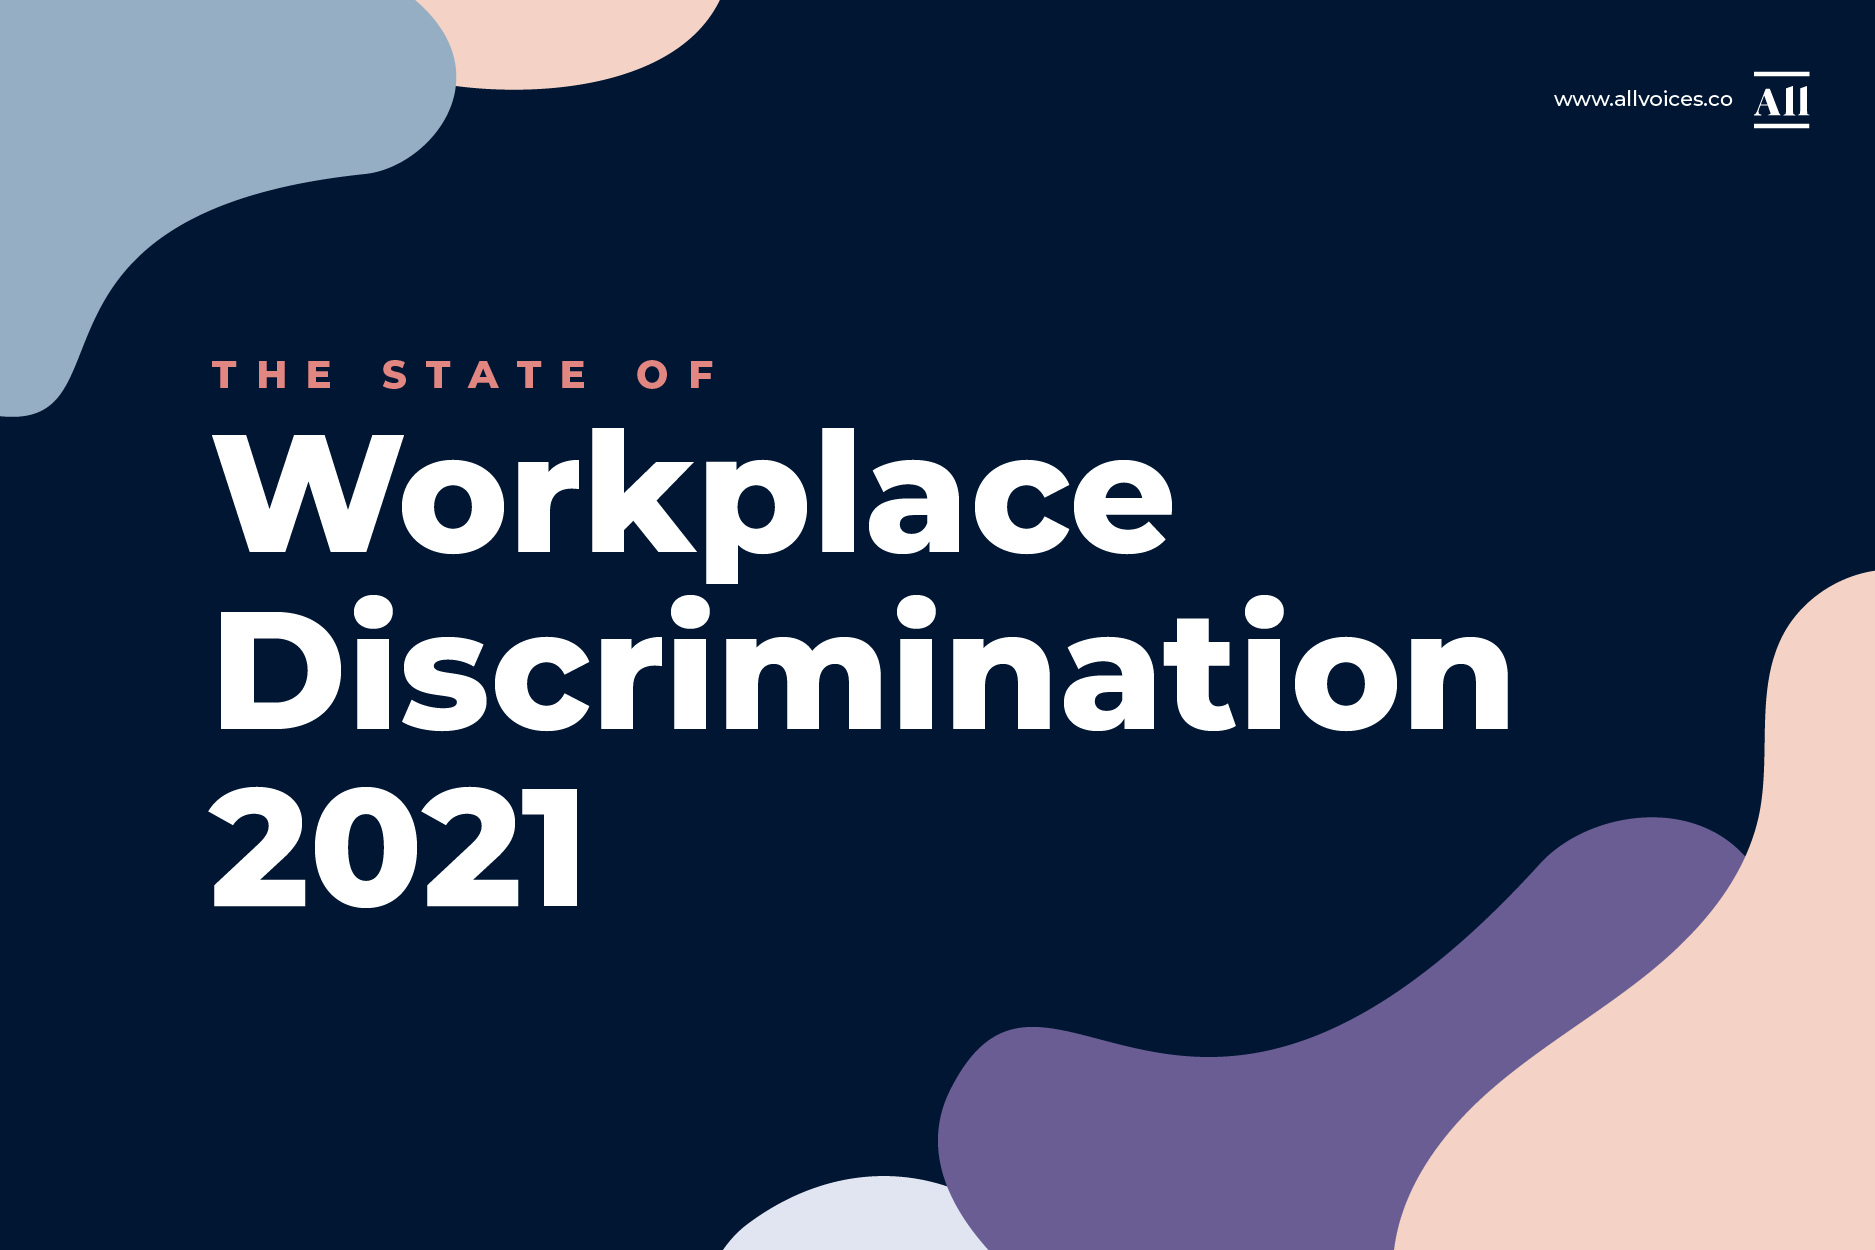 The State of Workplace Discrimination 2021